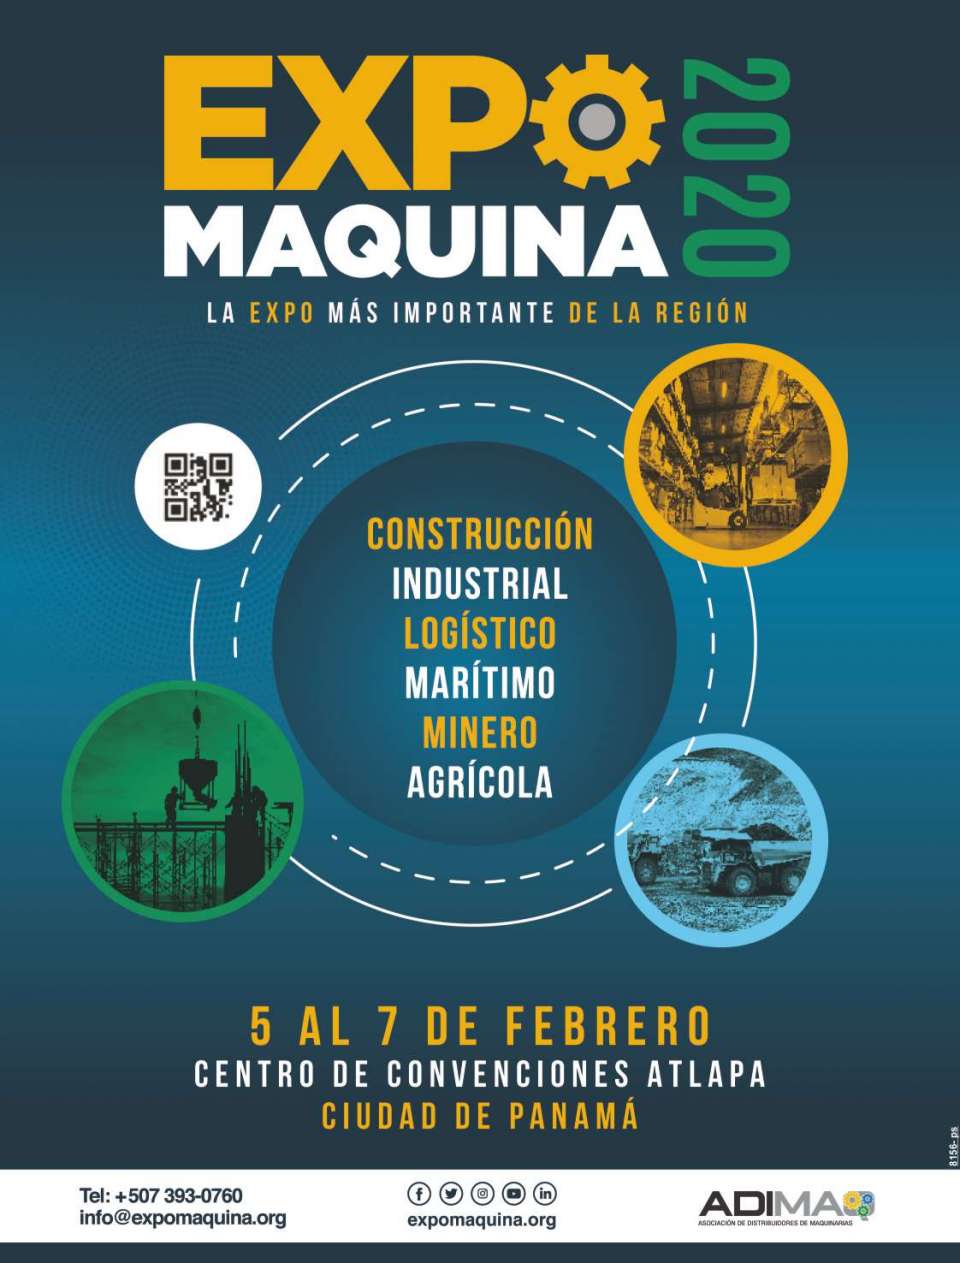 The most important exhibition in the region, from February 5 to 7, 2020 at Atlapa Convention Center, in Panama City